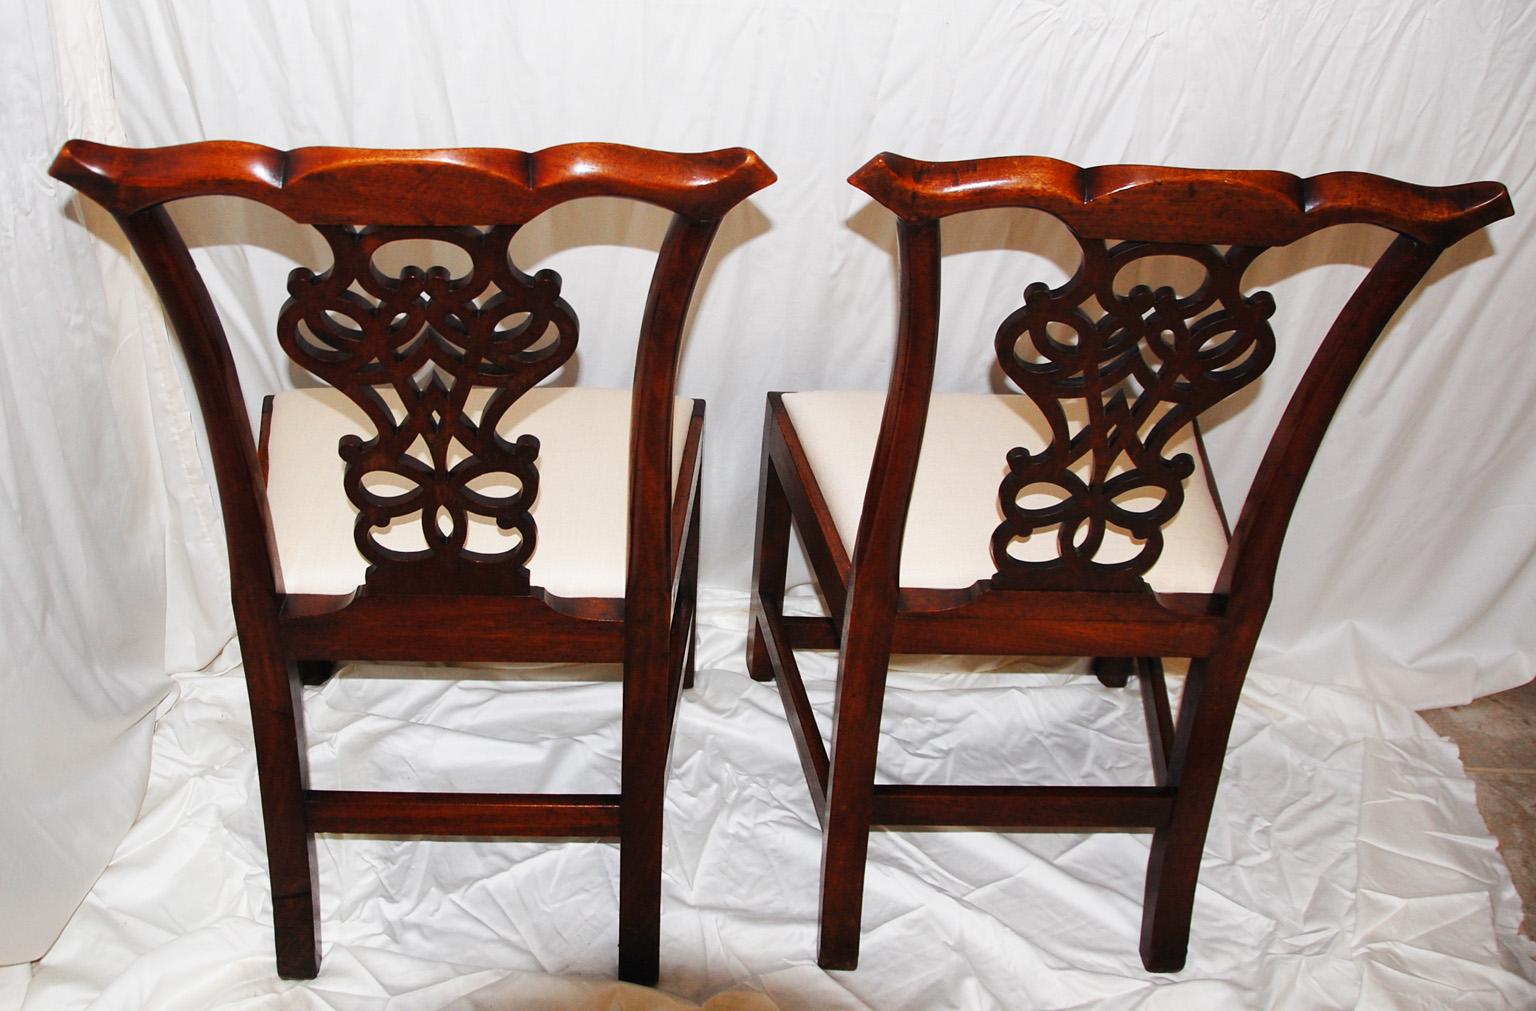 English Georgian Period Chippendale Pair of Sidechairs with Pierced Splats For Sale 1